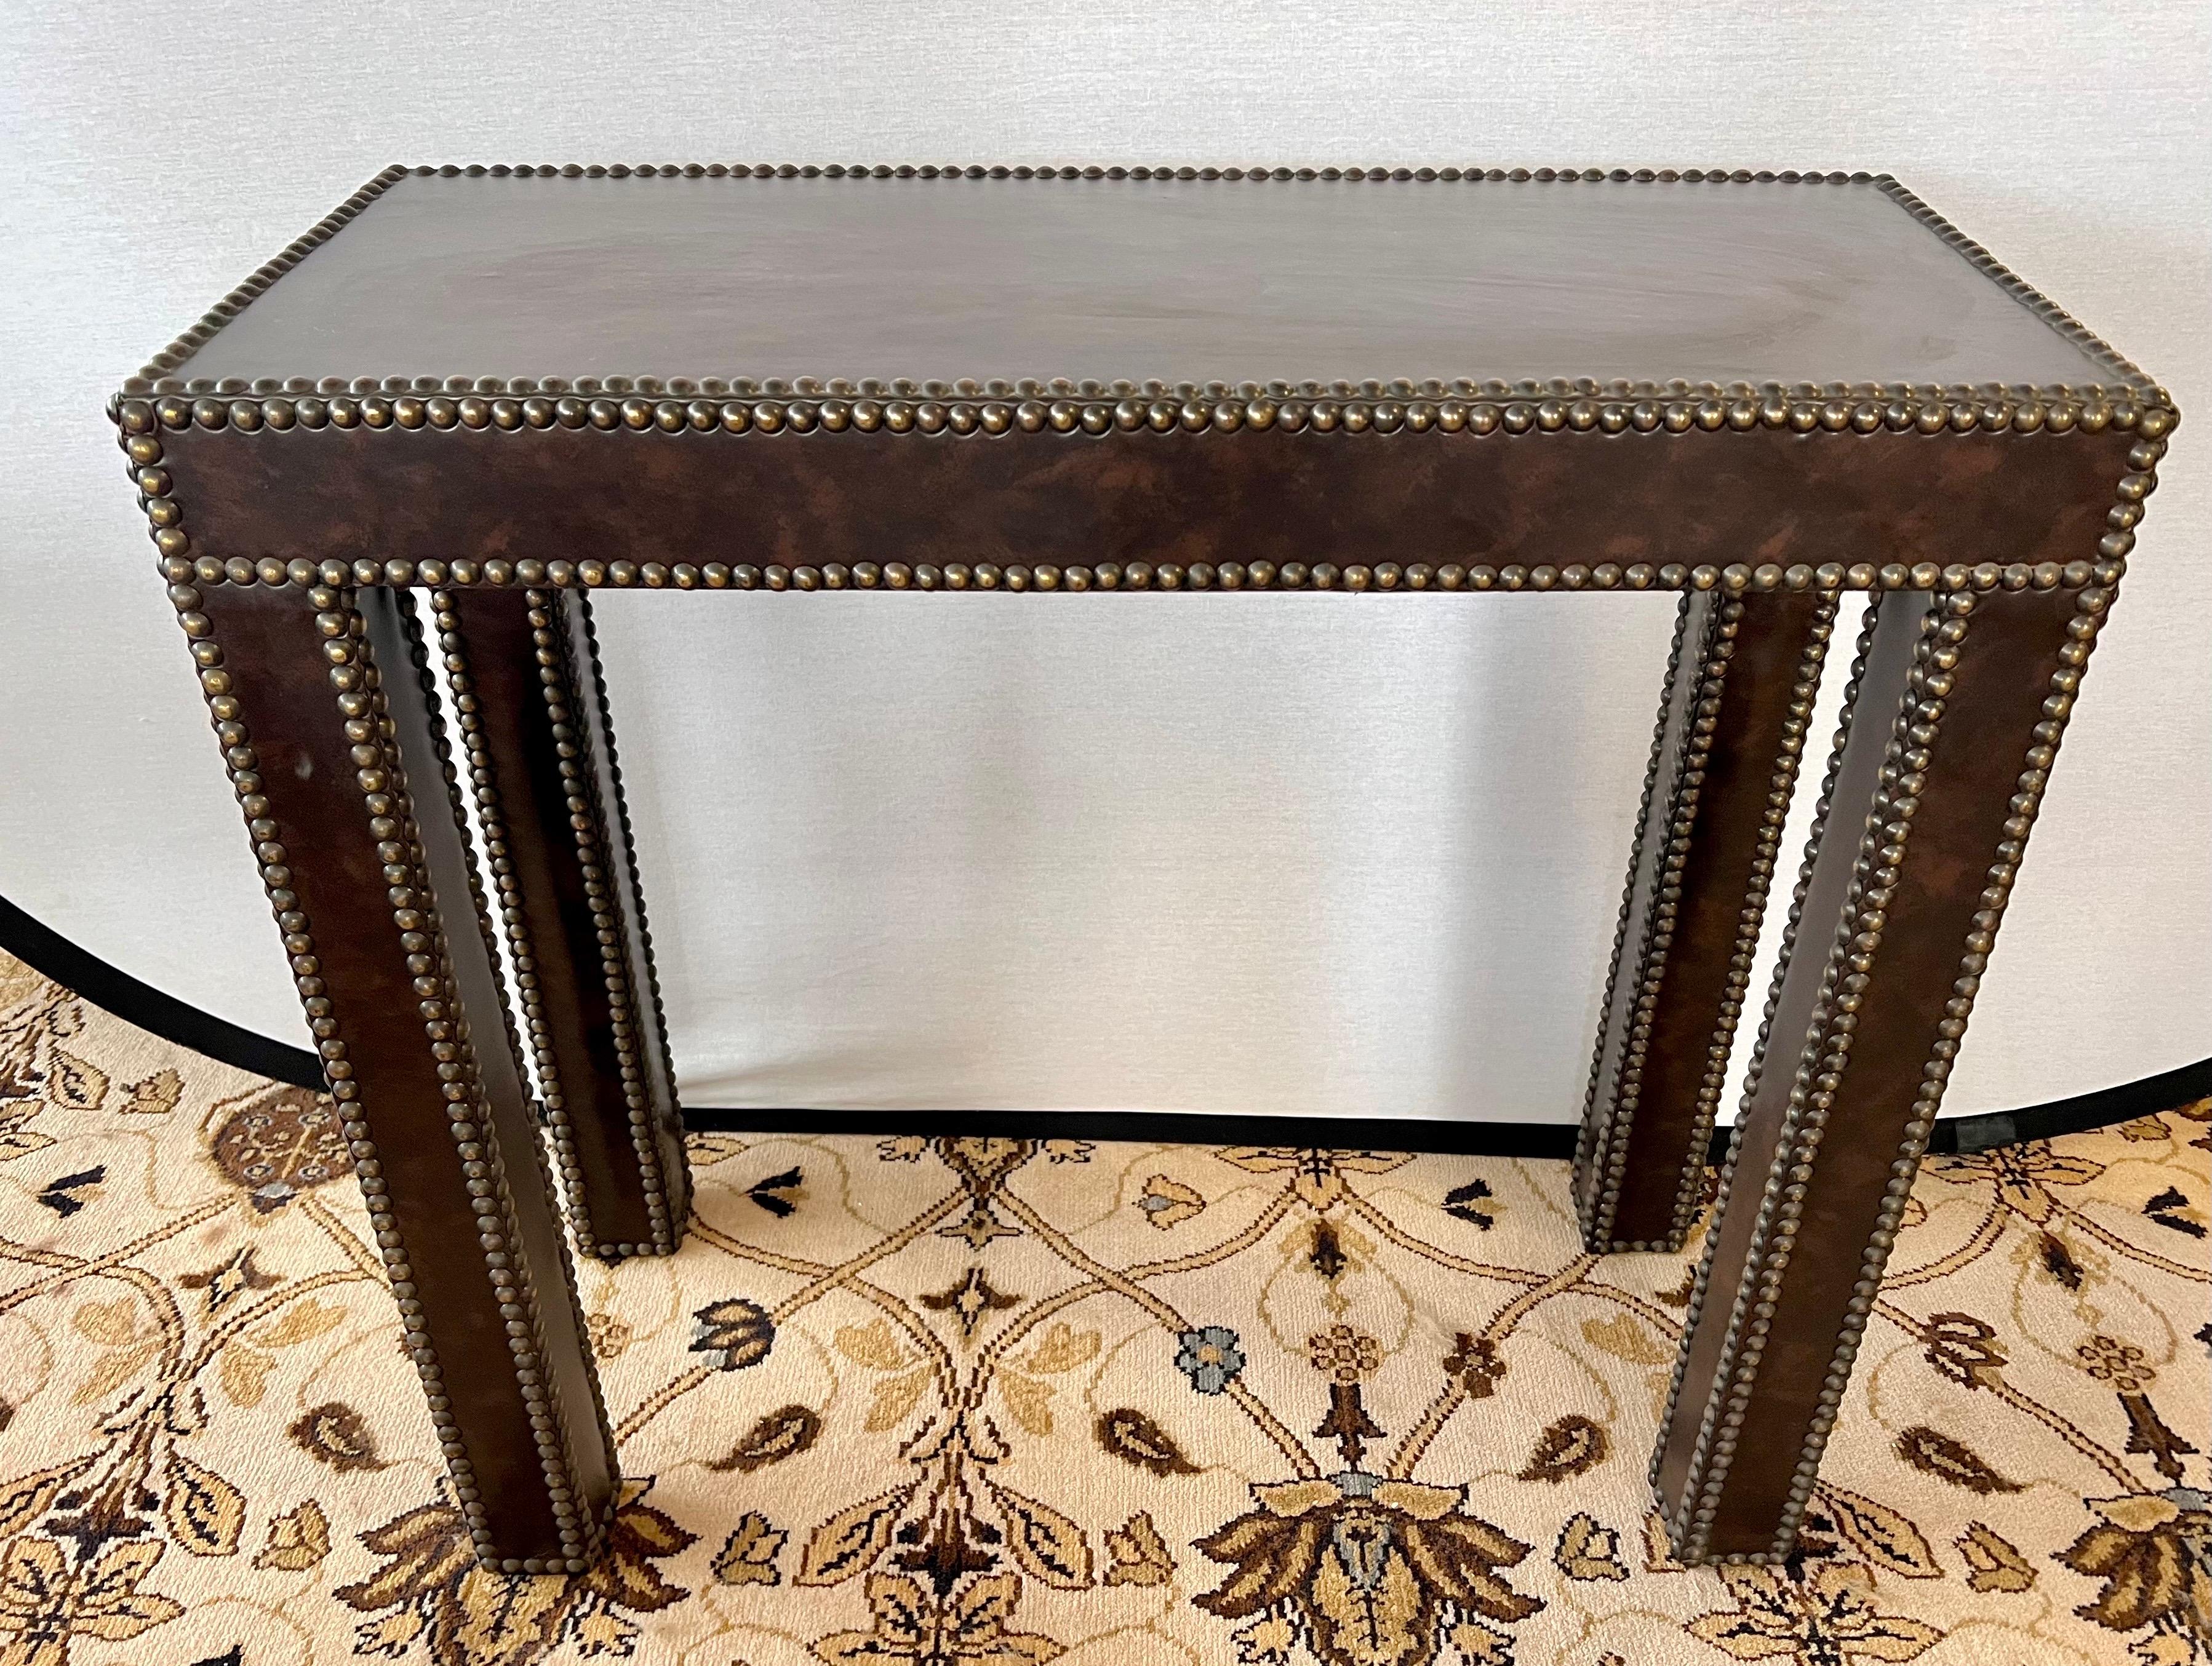 Handsome pair of custom brown leather wrapped console tables with clean lines.
Finished with antique brass nailheads.